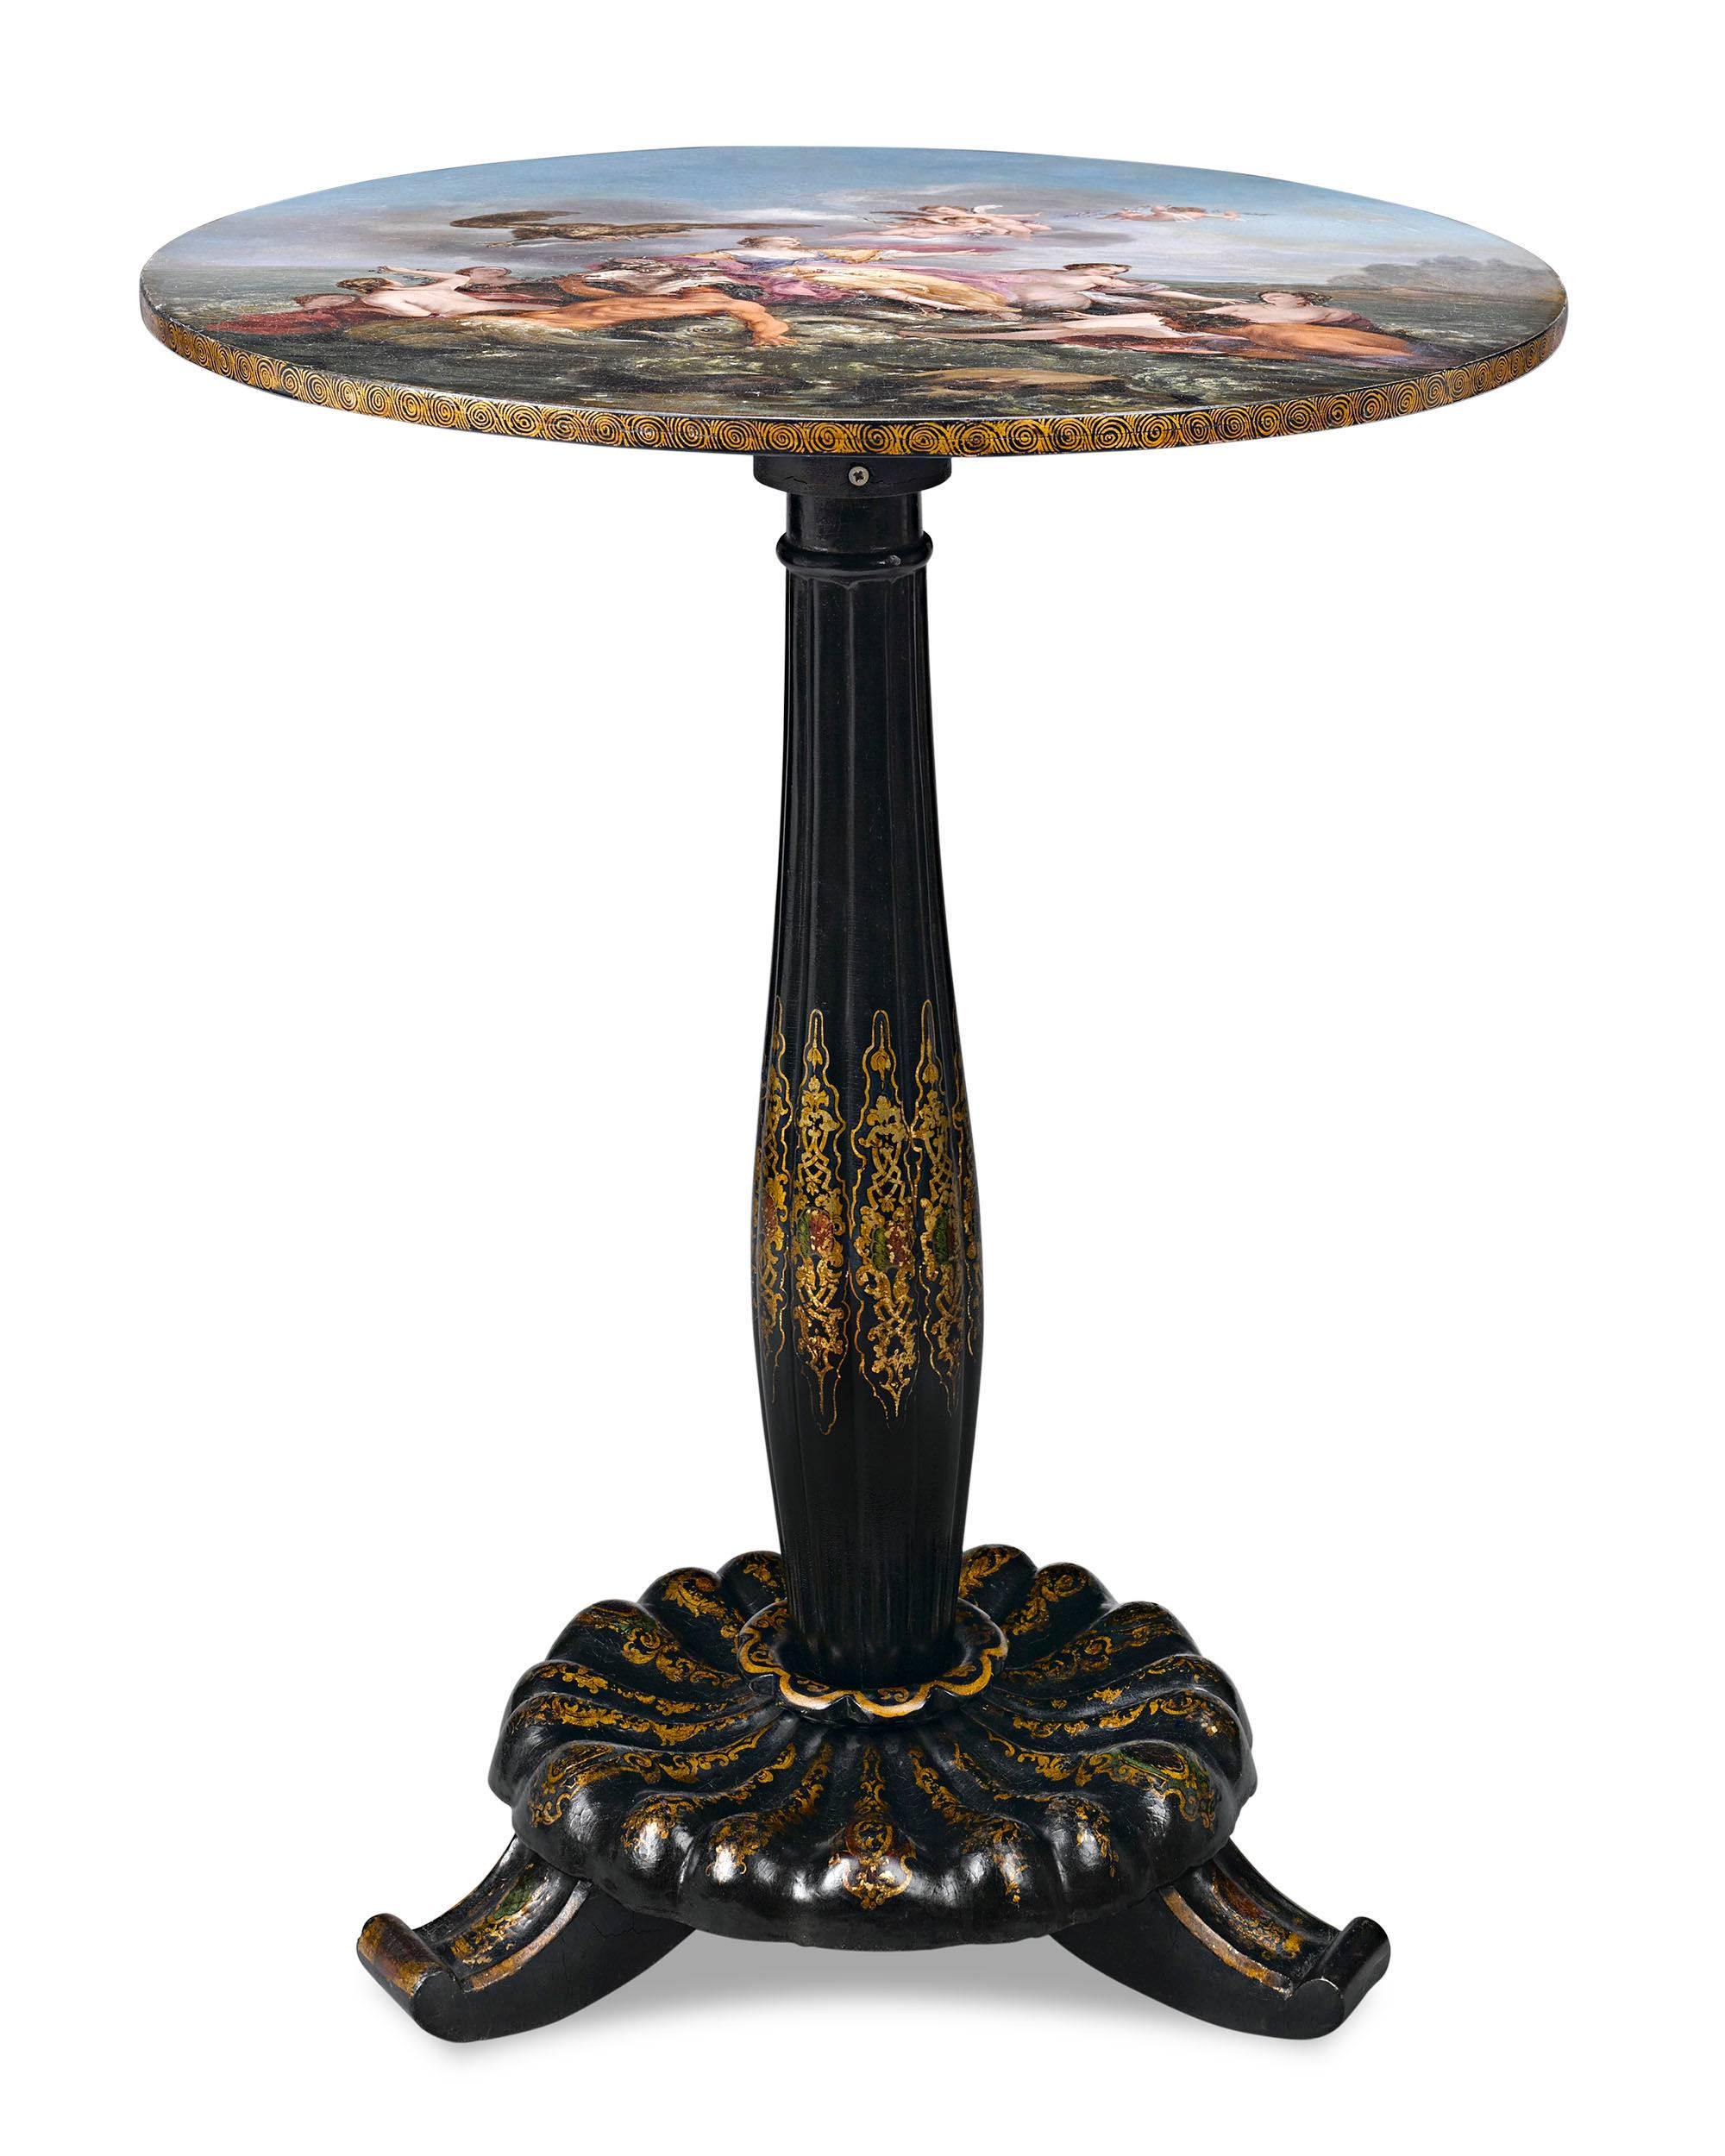 The renowned firm of Jennens and Bettridge created this exceptional tilt-top table featuring a stunning rendition of Jean-Baptiste Marie Pierre's Rococo masterpiece The Rape of Europa upon the surface. Aaron Jennens & T.H. Bettridge (fl. 1815-1864)